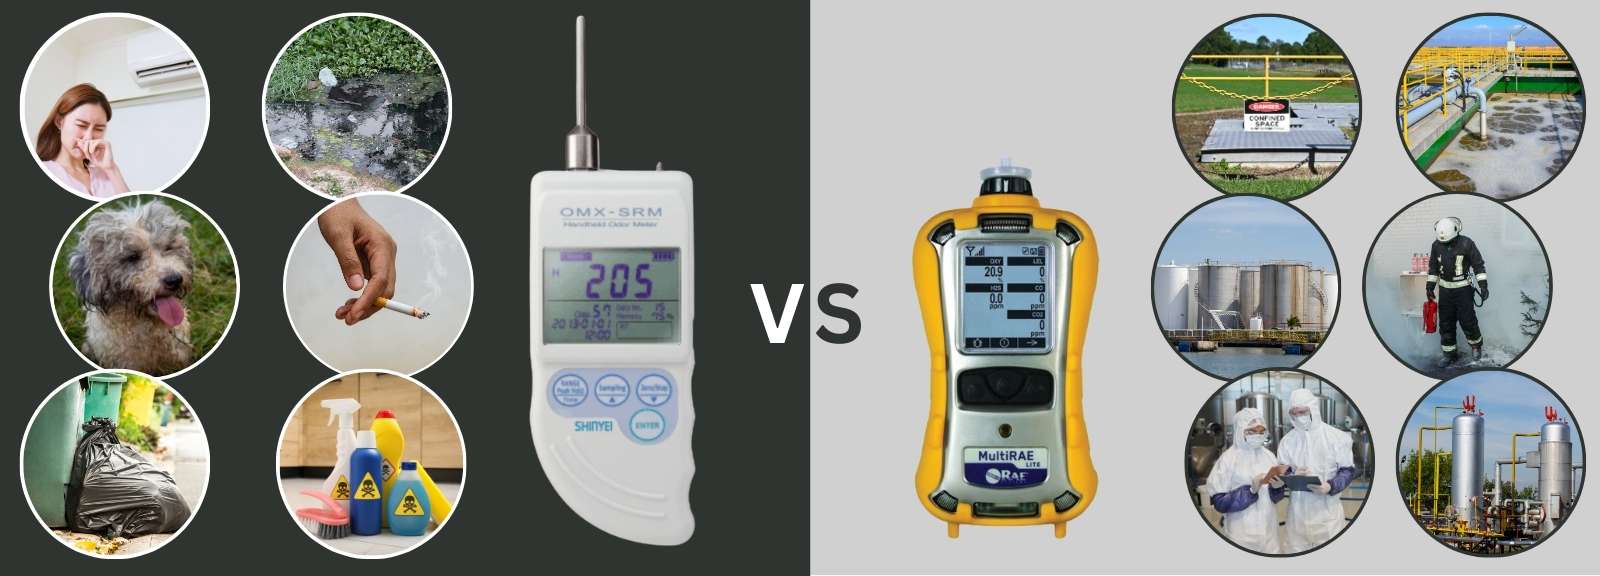 Do odour meters and gas detectors serve different purposes?